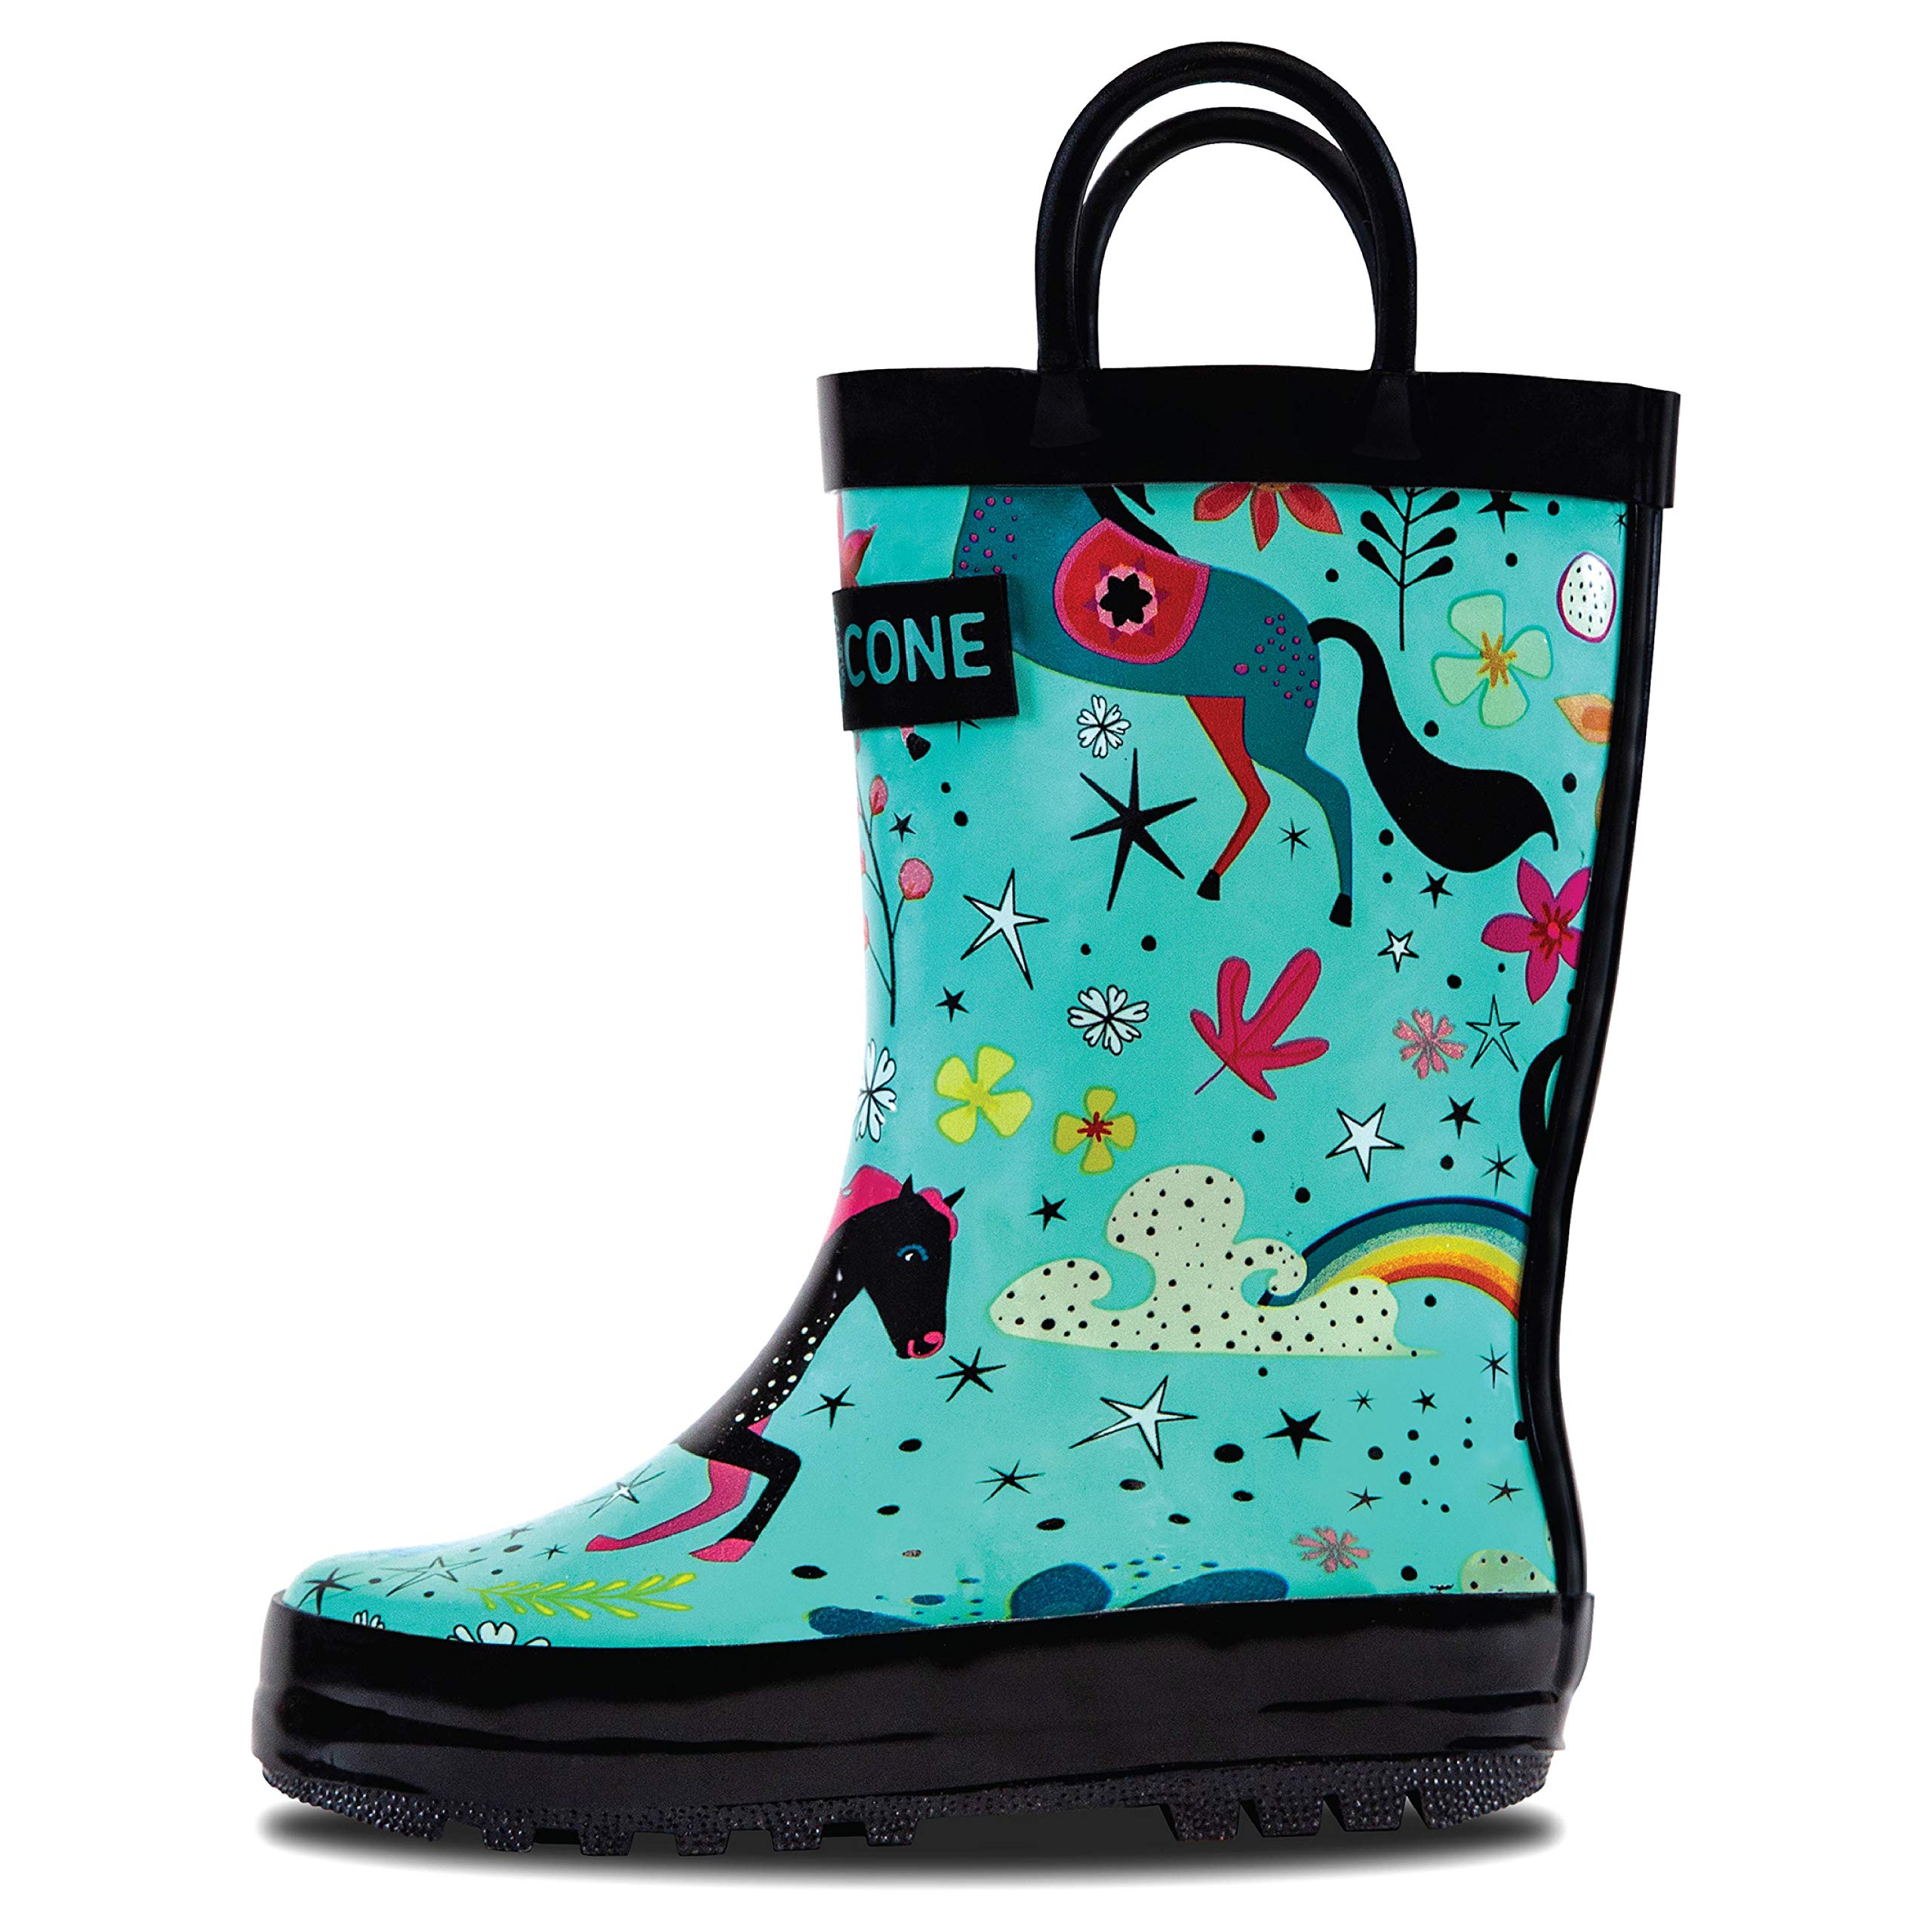 Lone Cone Rain Boots with Easy-On Handles in Fun Patterns for Toddlers and Kids